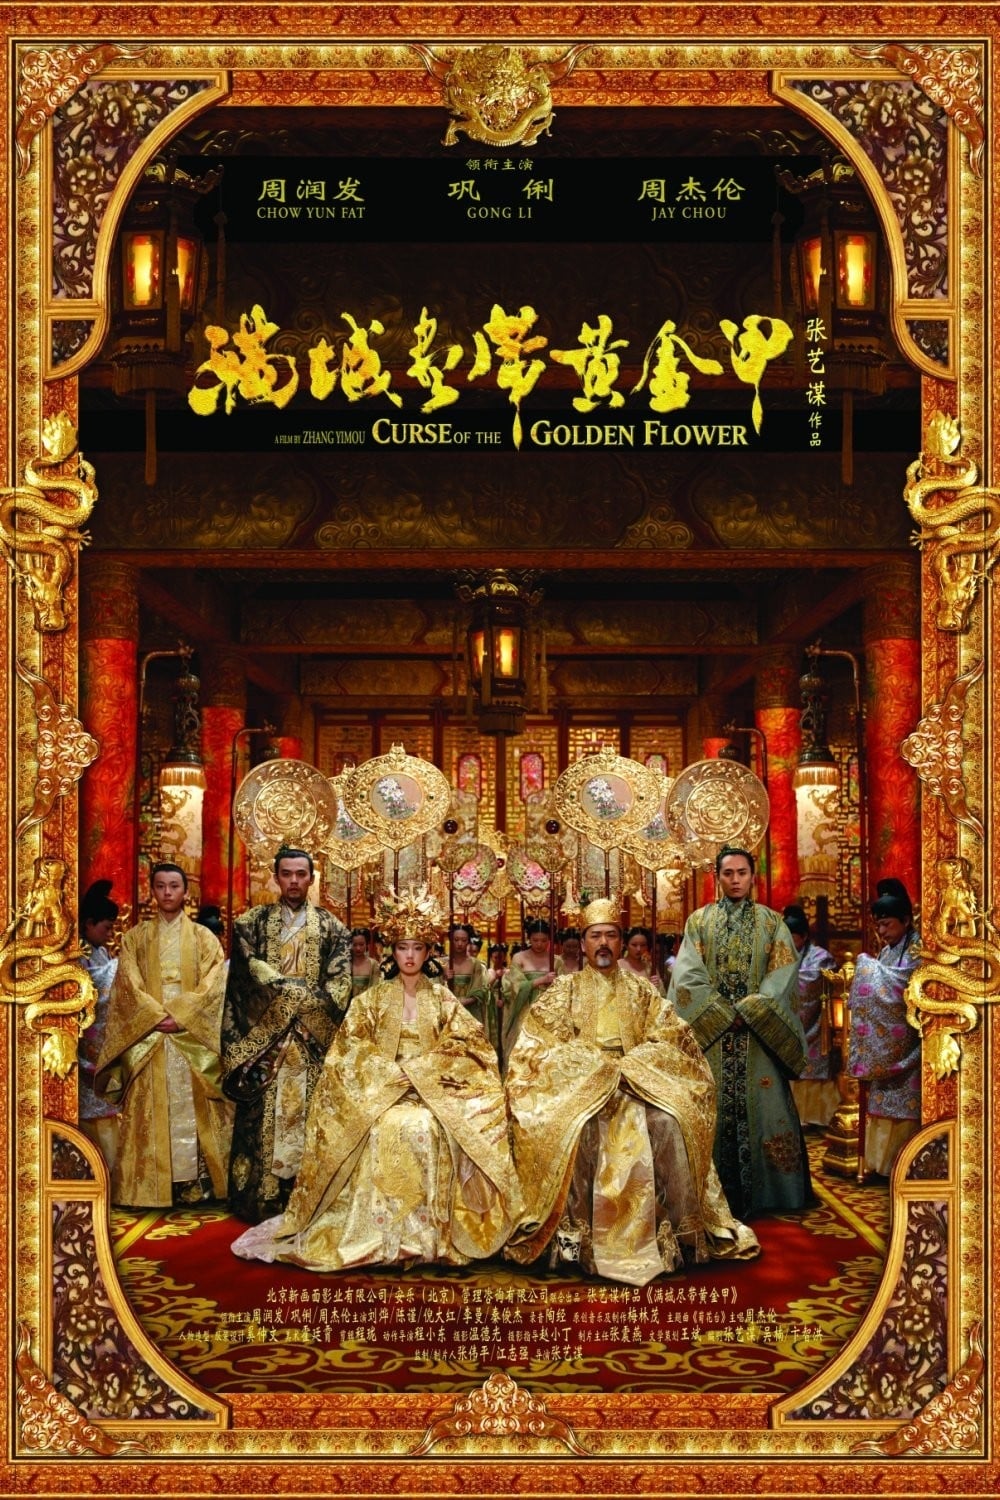 Curse of the Golden Flower poster